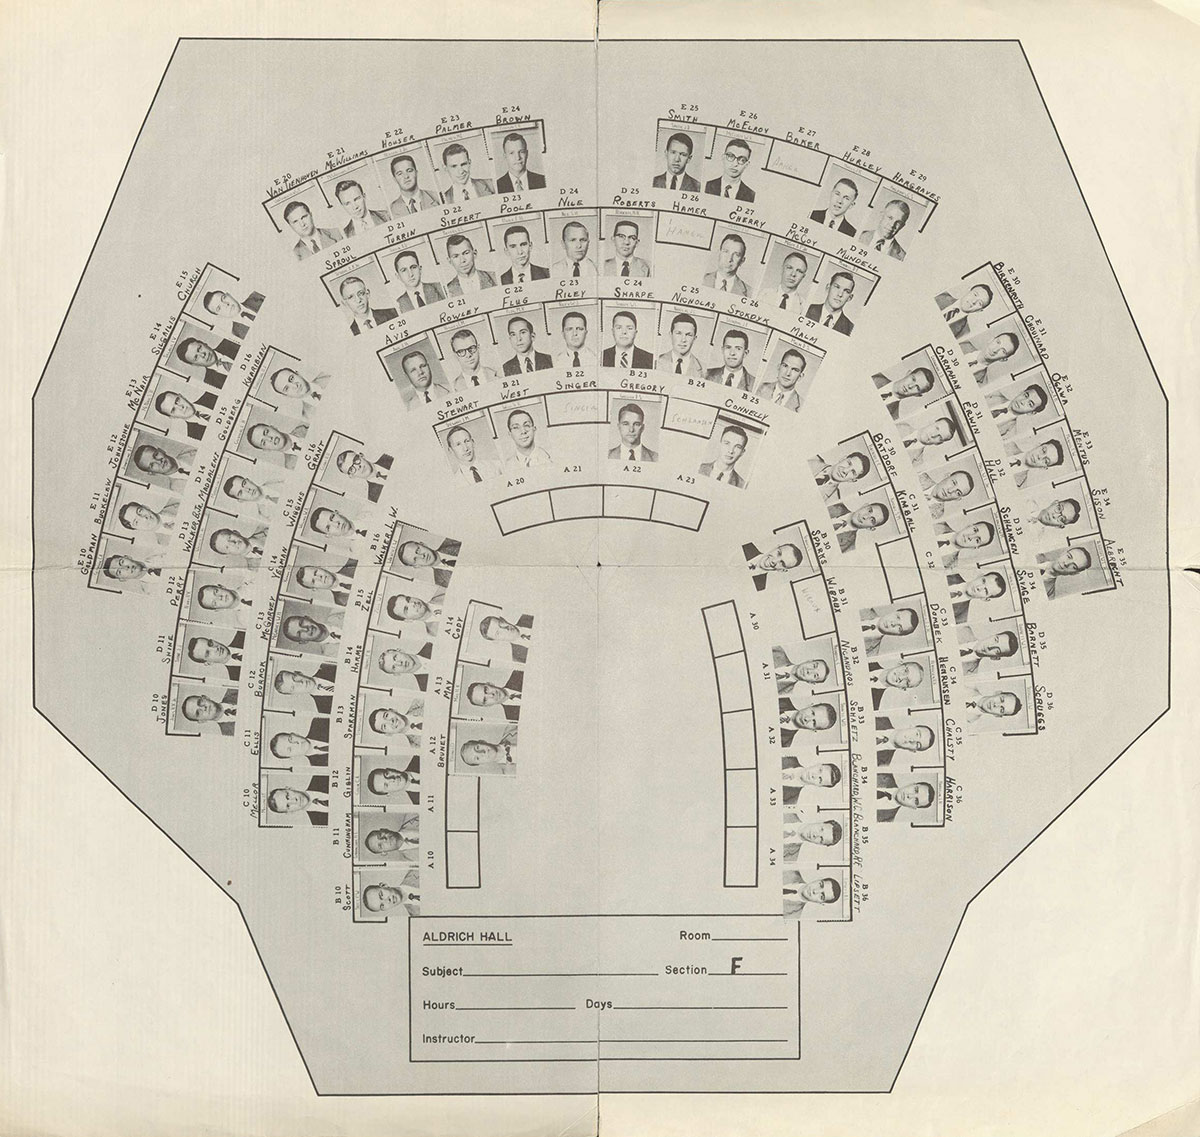 Seating chart for Aldrich Hall classroom with each student represented by black and white headshots.